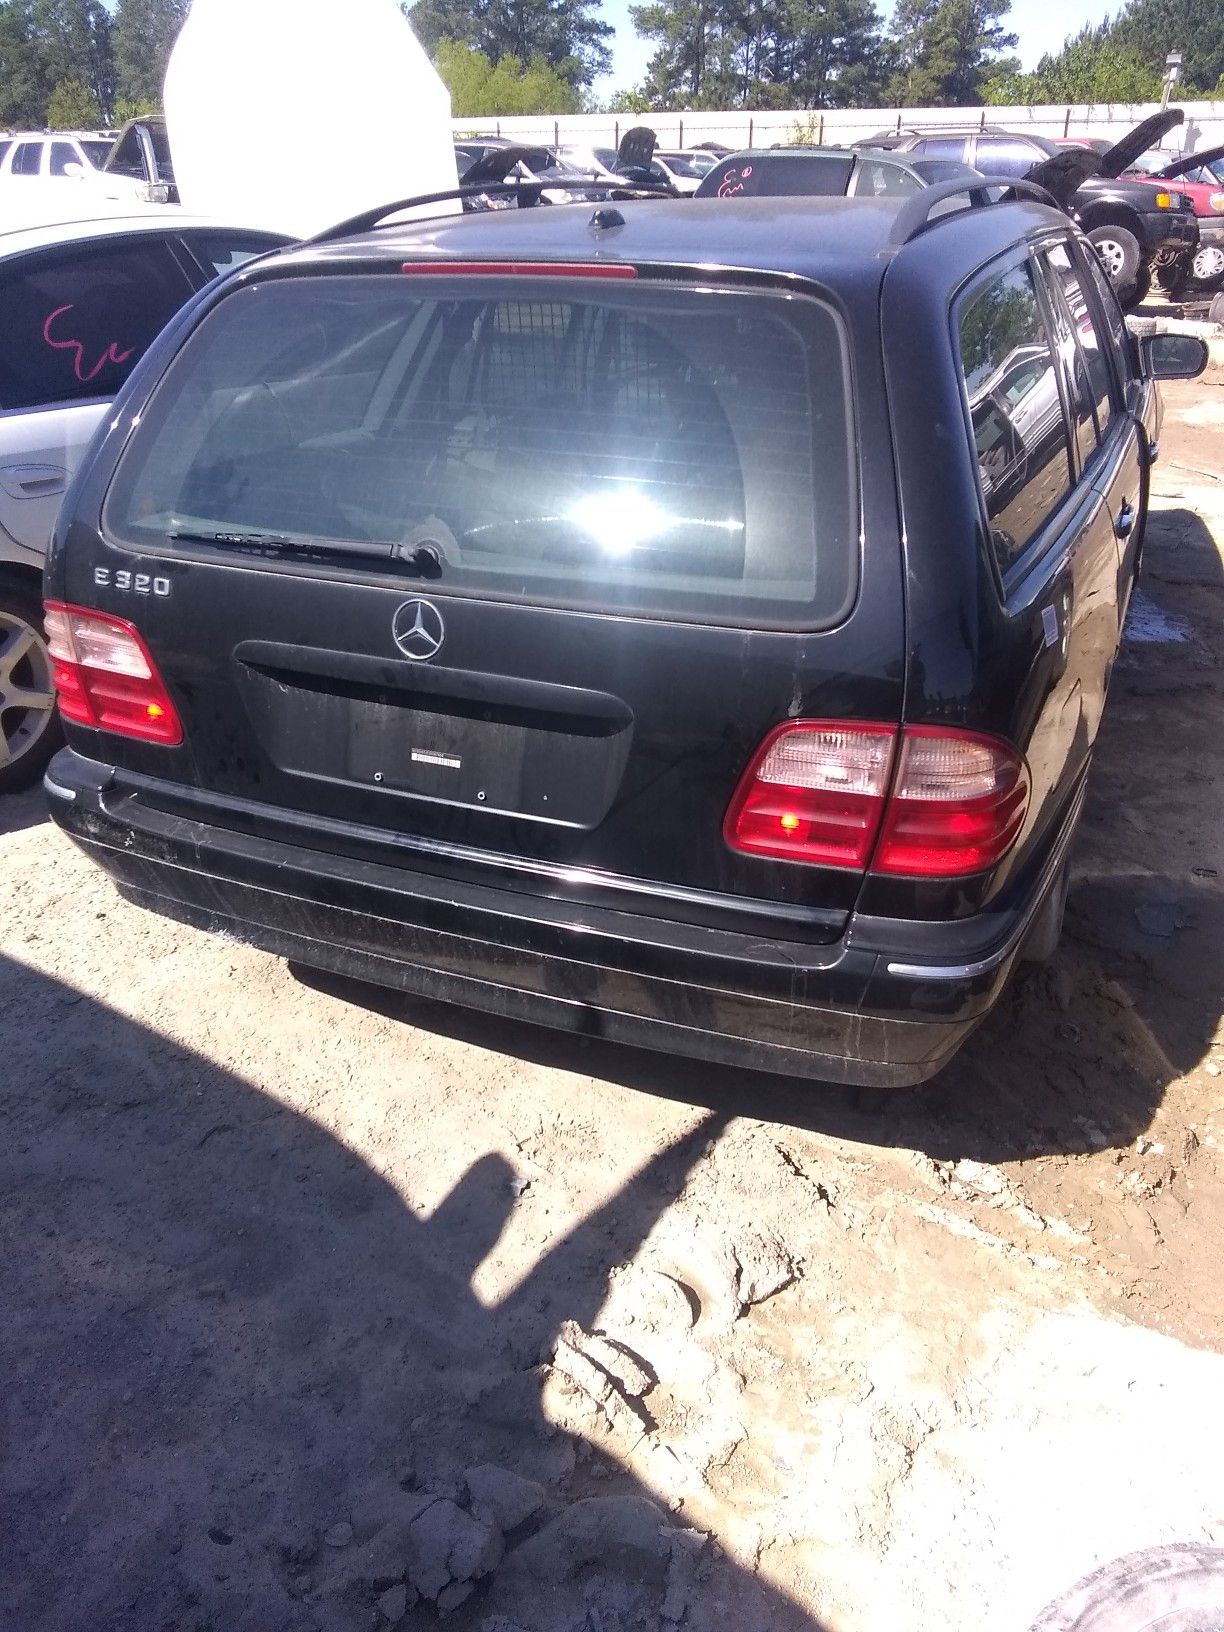 2003 Mercedes Benz E320 Station Wagon for parts